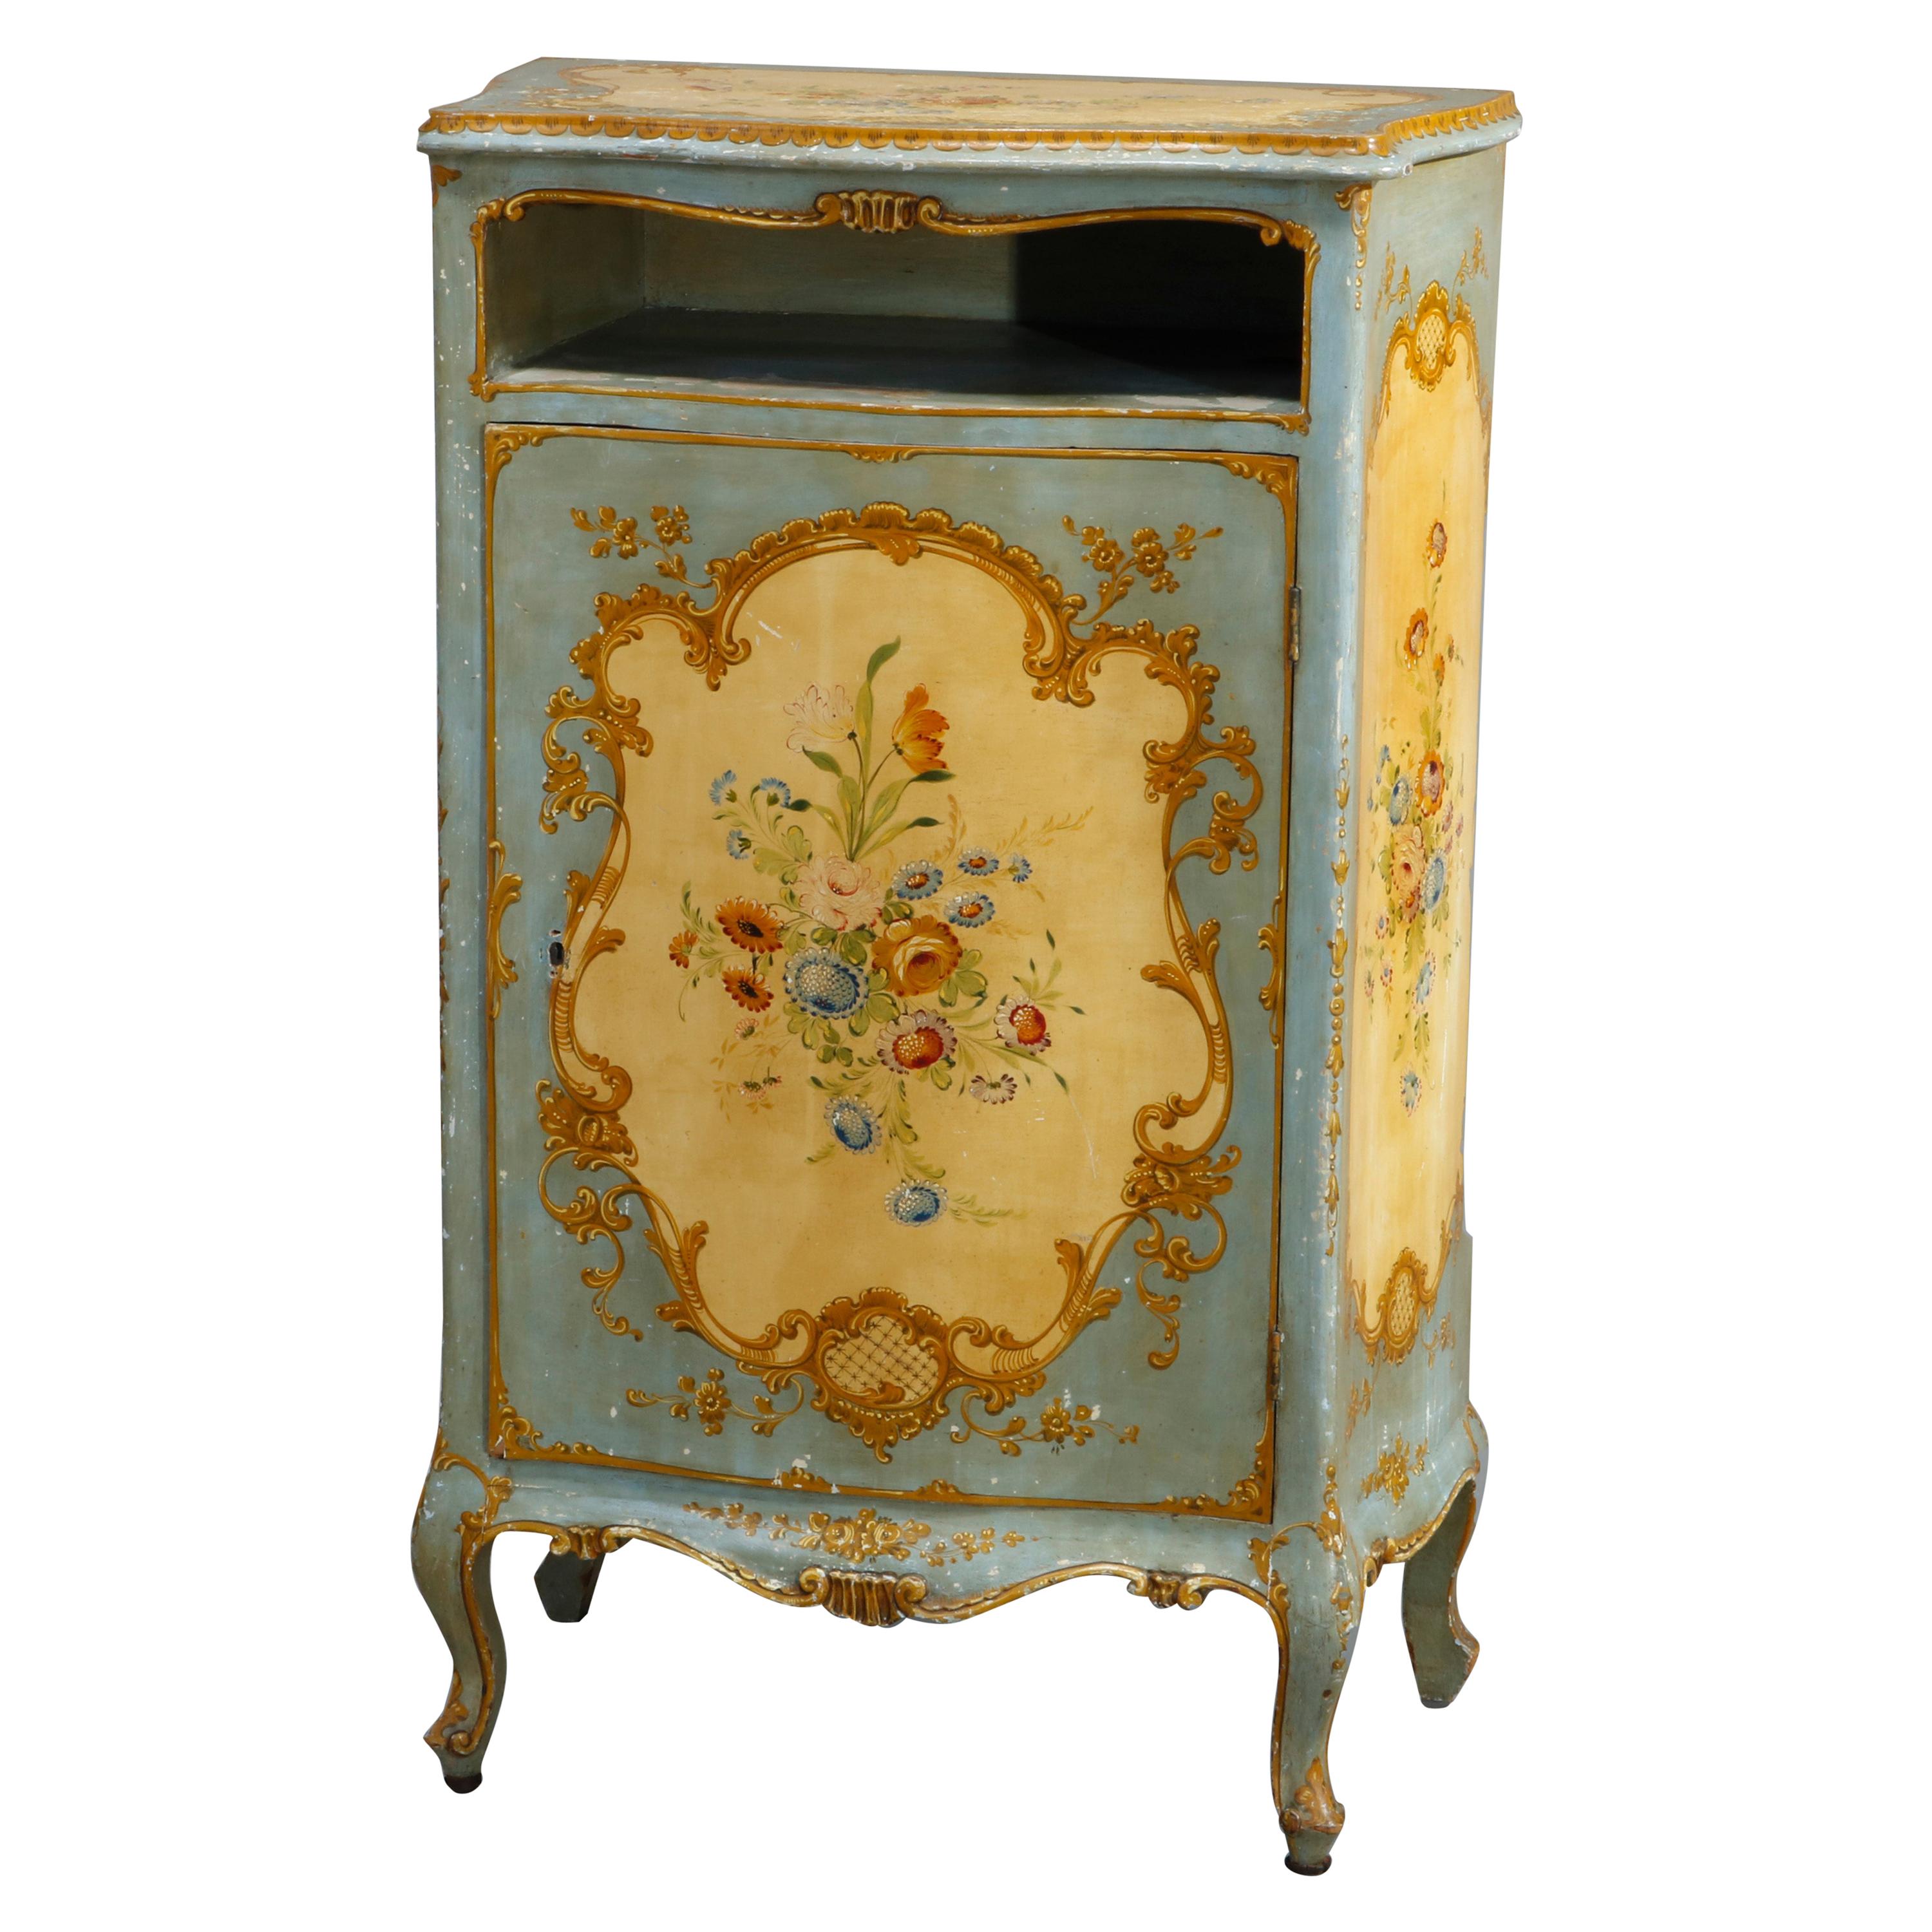 Antique French Floral Paint Decorated Bombe Music Cabinet, Circa 1890